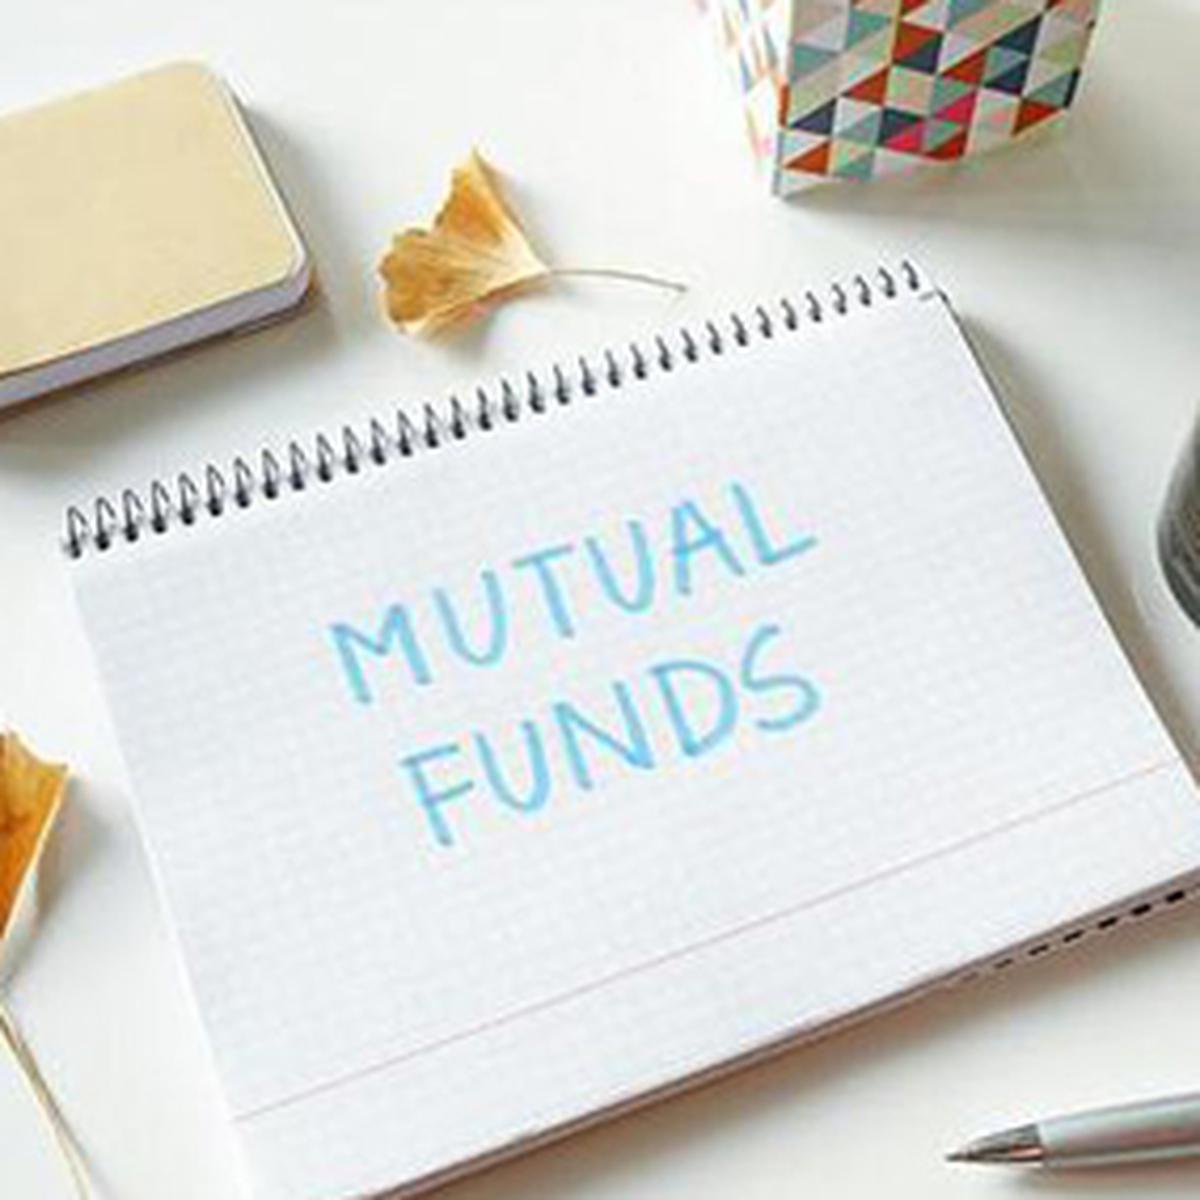 Mutual funds assets rise to ₹39.88 lakh crore in September on higher inflows into SIPs: AMFI